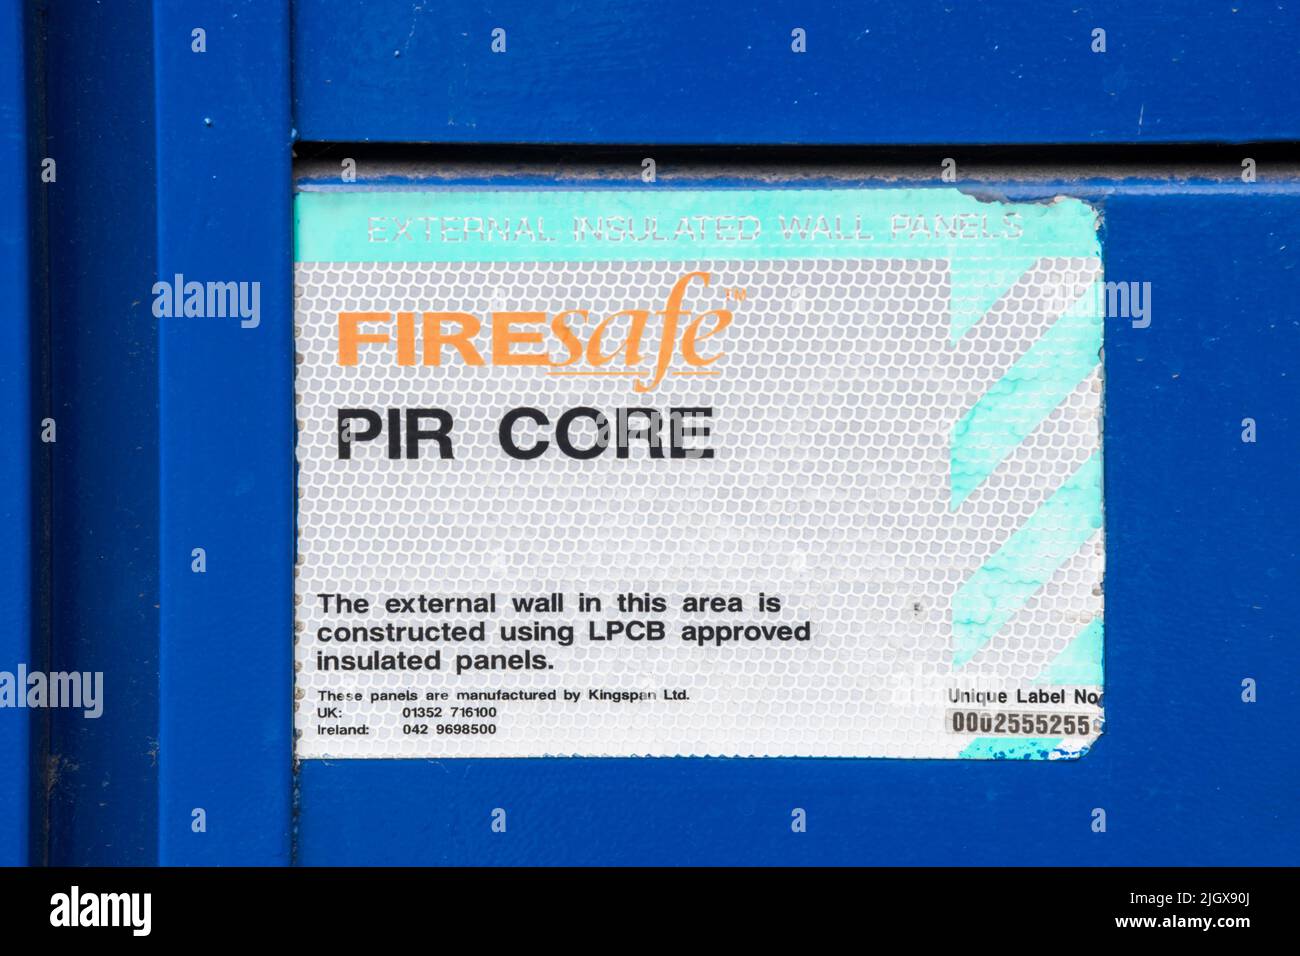 Label on building wall says it is constructed using LPCB Approved Kingspan Firesafe PIR Core external insulated wall panels. Stock Photo